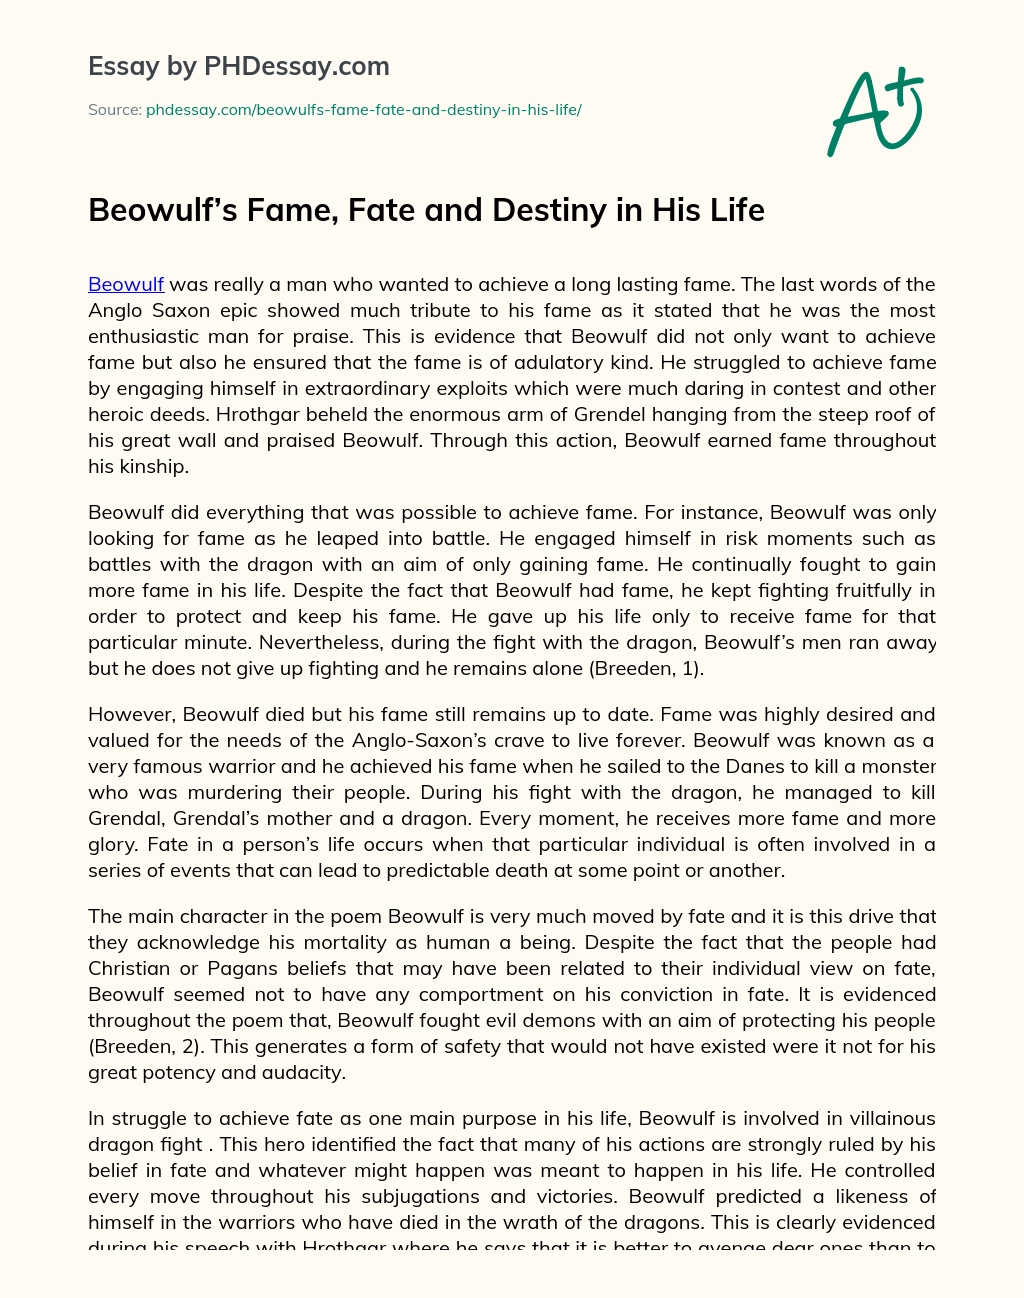 Beowulf’s Fame, Fate and Destiny in His Life essay